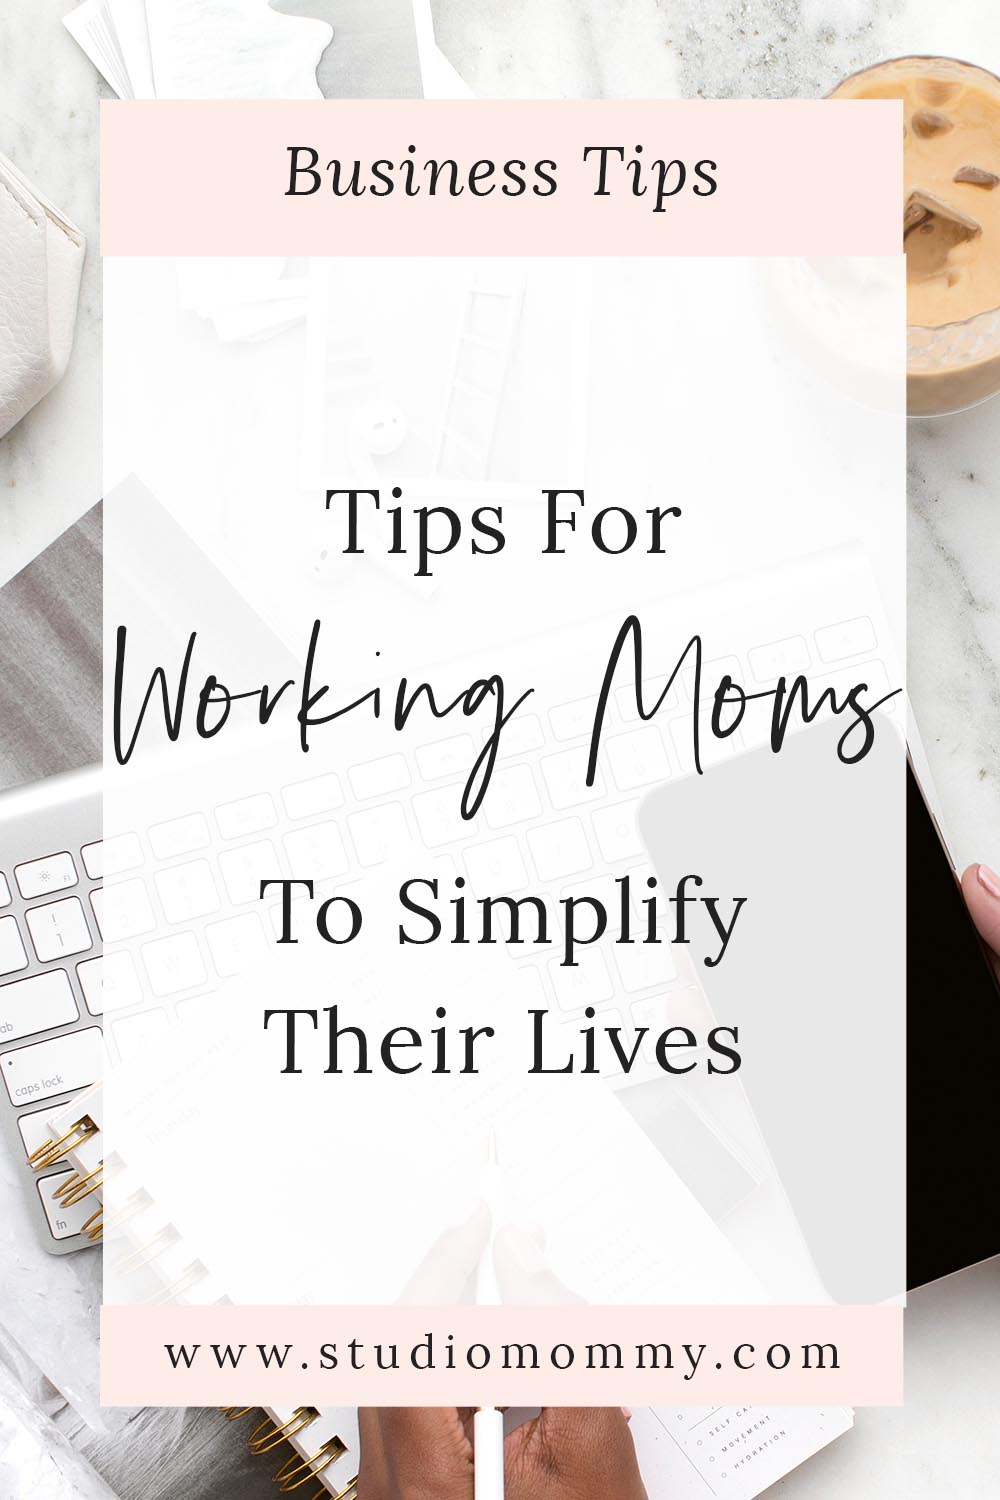 When you're a working mom, you're on the clock non-stop. It's easy to get overwhelmed and off-track. Fortunately, there are some simple ways you can streamline life to reduce stress and increase productivity. #workingmoms #WAHM #simplify @studiomommy